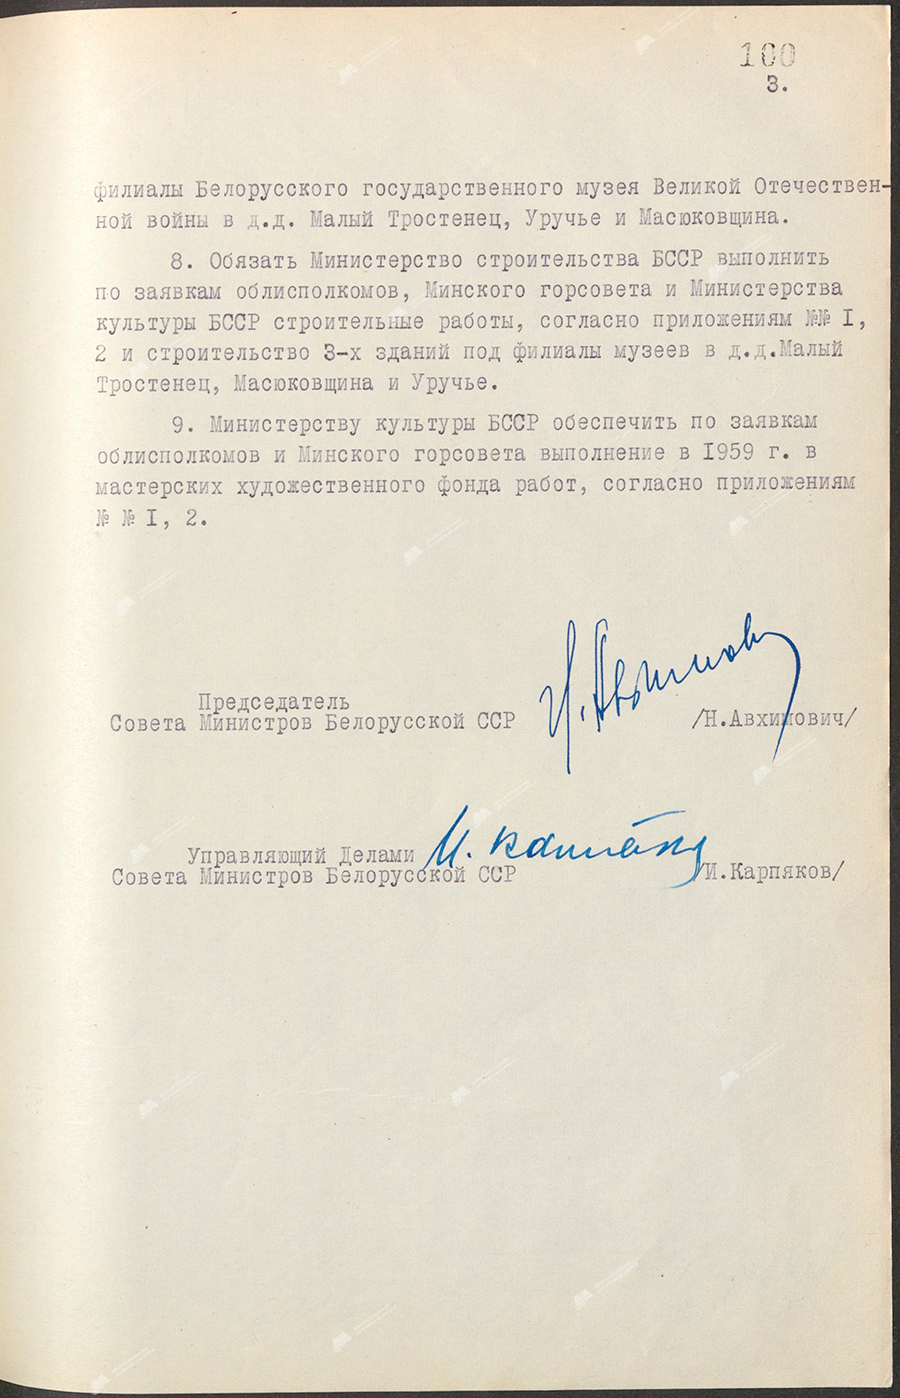 Resolution No. 248 of the Council of Ministers of the BSSR «On the improvement of burial places of soldiers of the Soviet Army, partisans and civilians who died in 1941 - 1945.» and on the perpetuation of significant places and events associated with the Great Patriotic War on the territory of the Belarusian SSR»-стр. 2